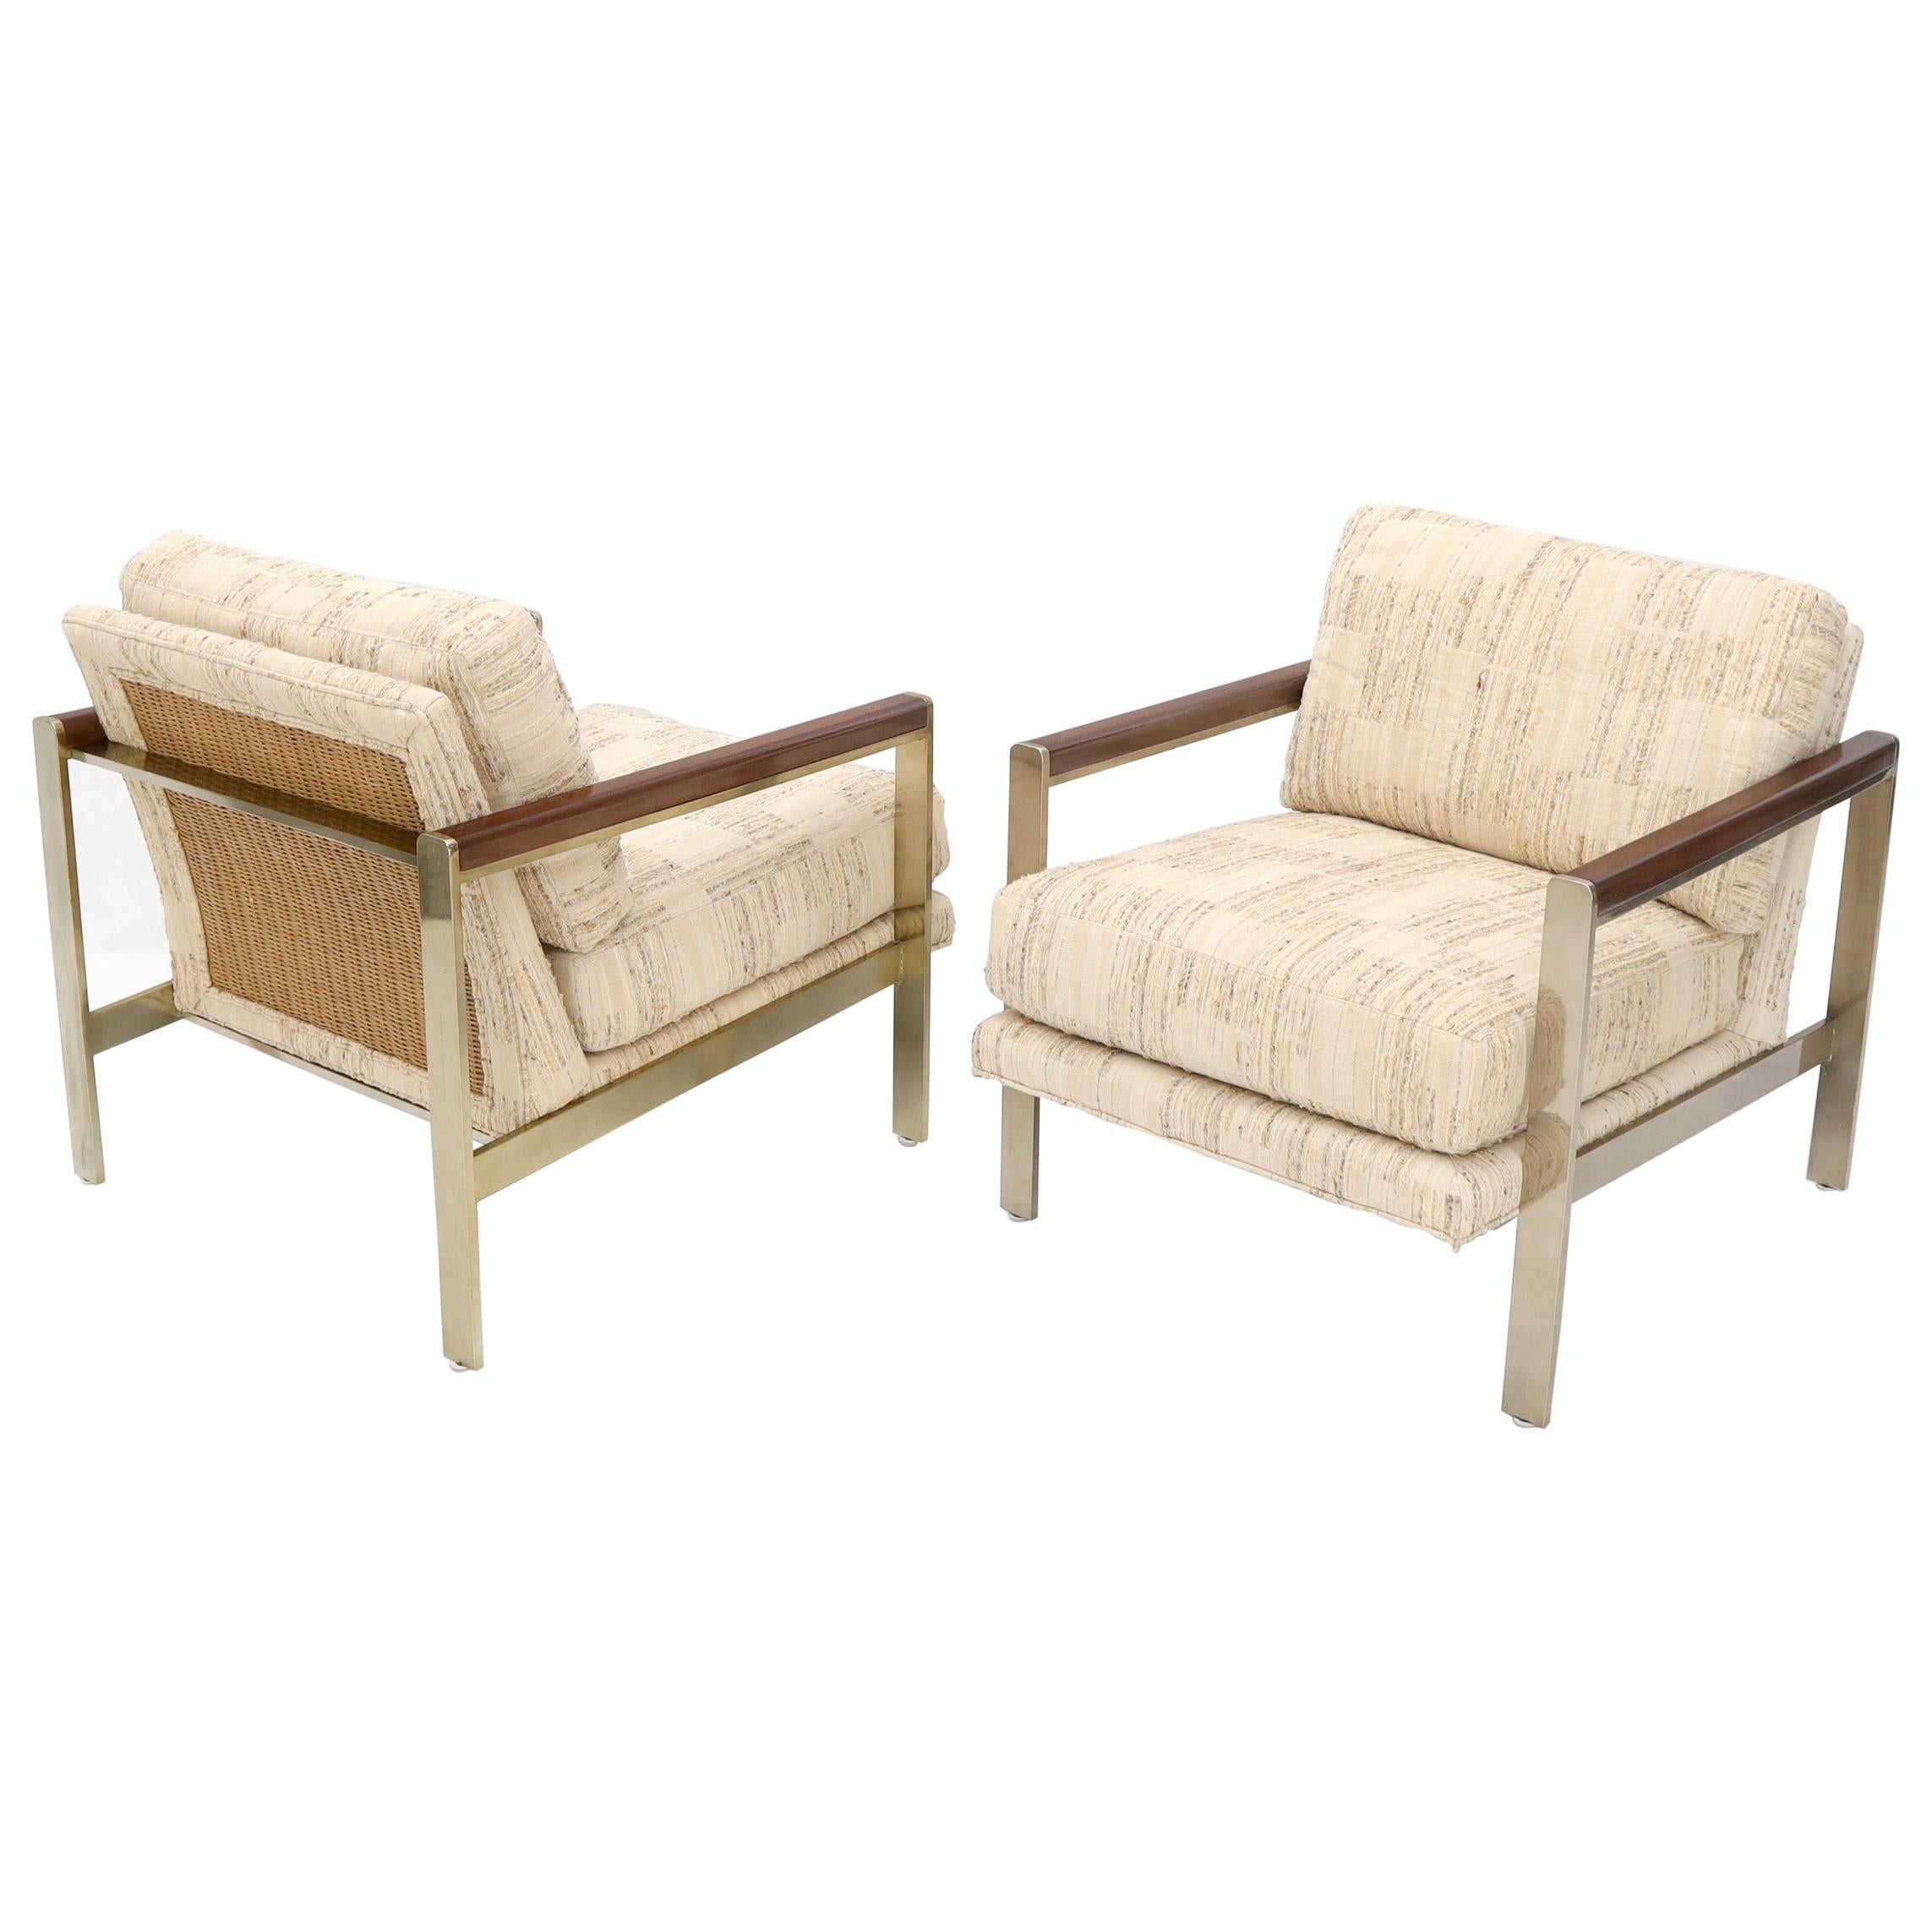 Pair of Mid-Century Modern Lounge Chairs by Drexel